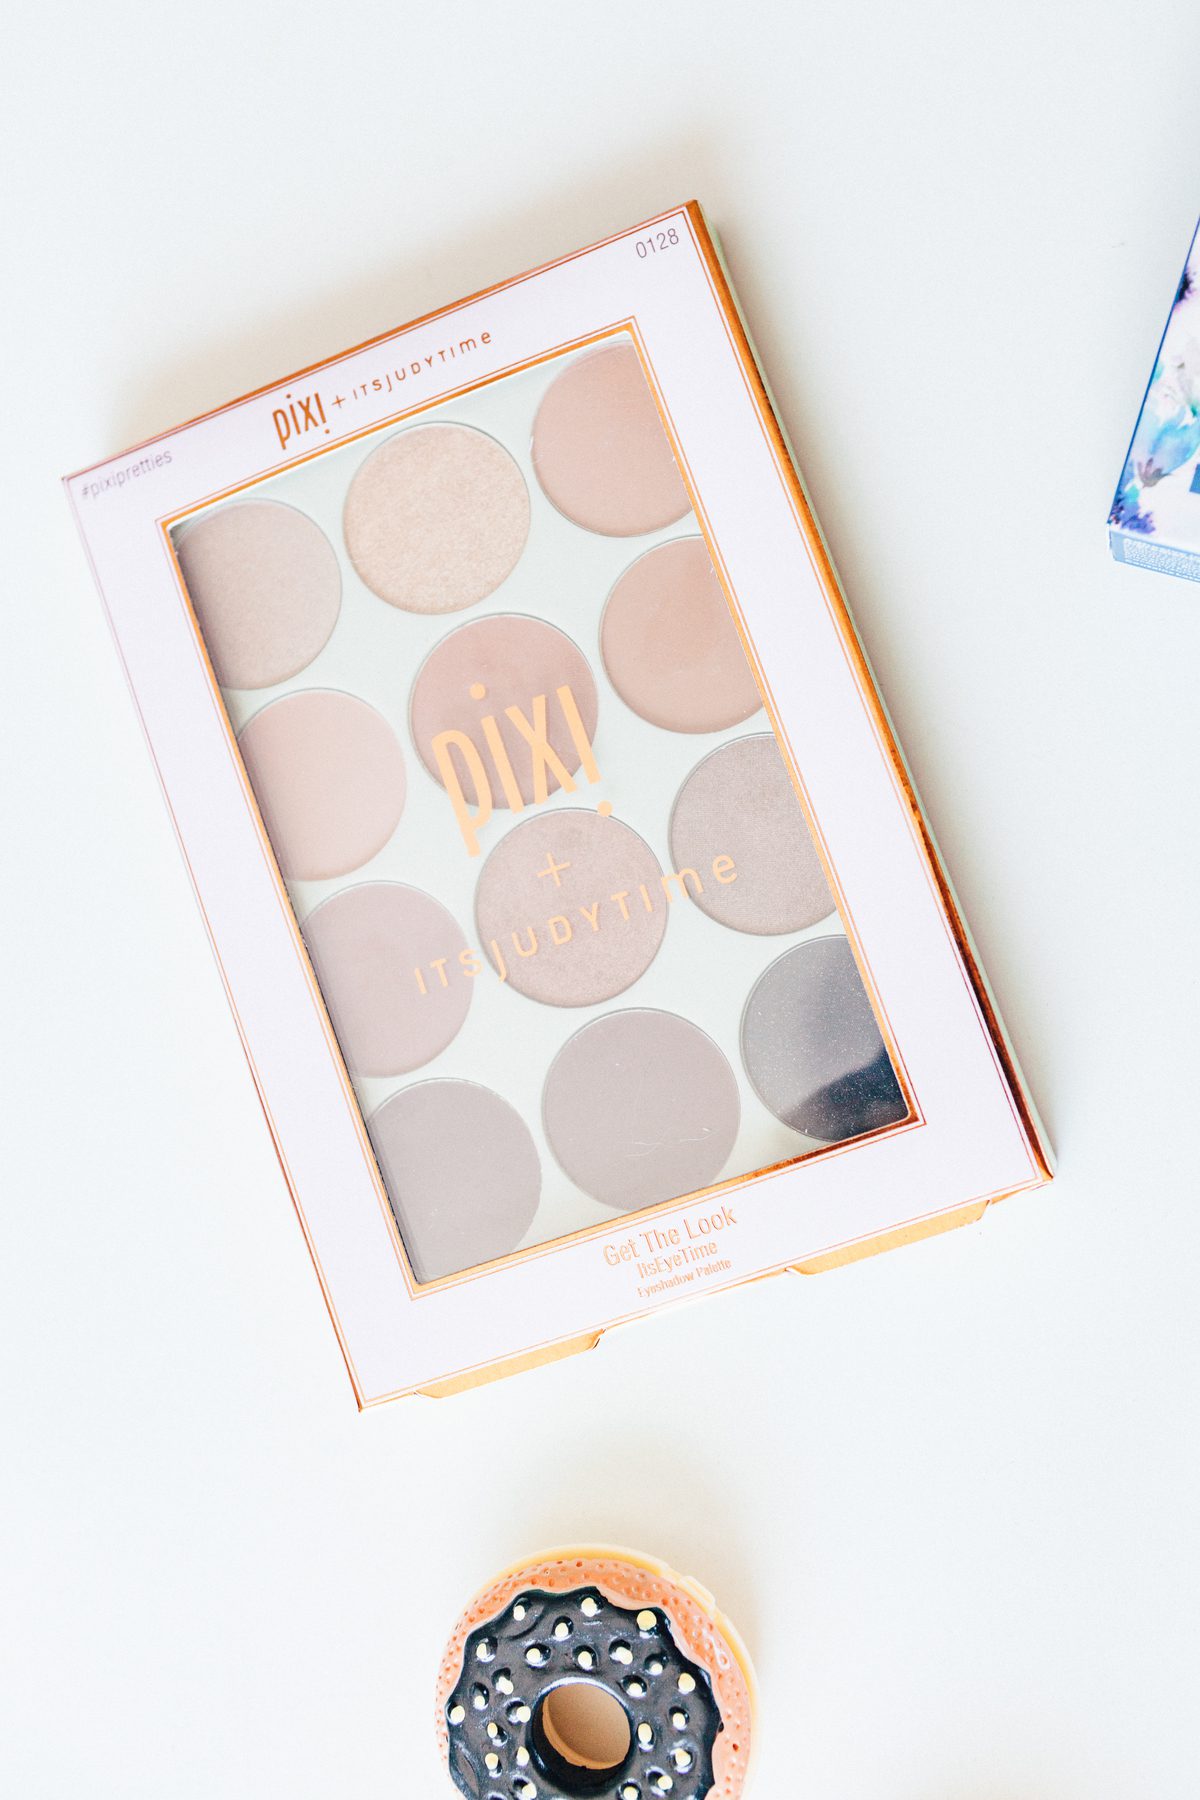 top view of makeup guaranteed from Pixi + ItsJudyTime Get The Look ItsEyeTime Eyeshadow Palette